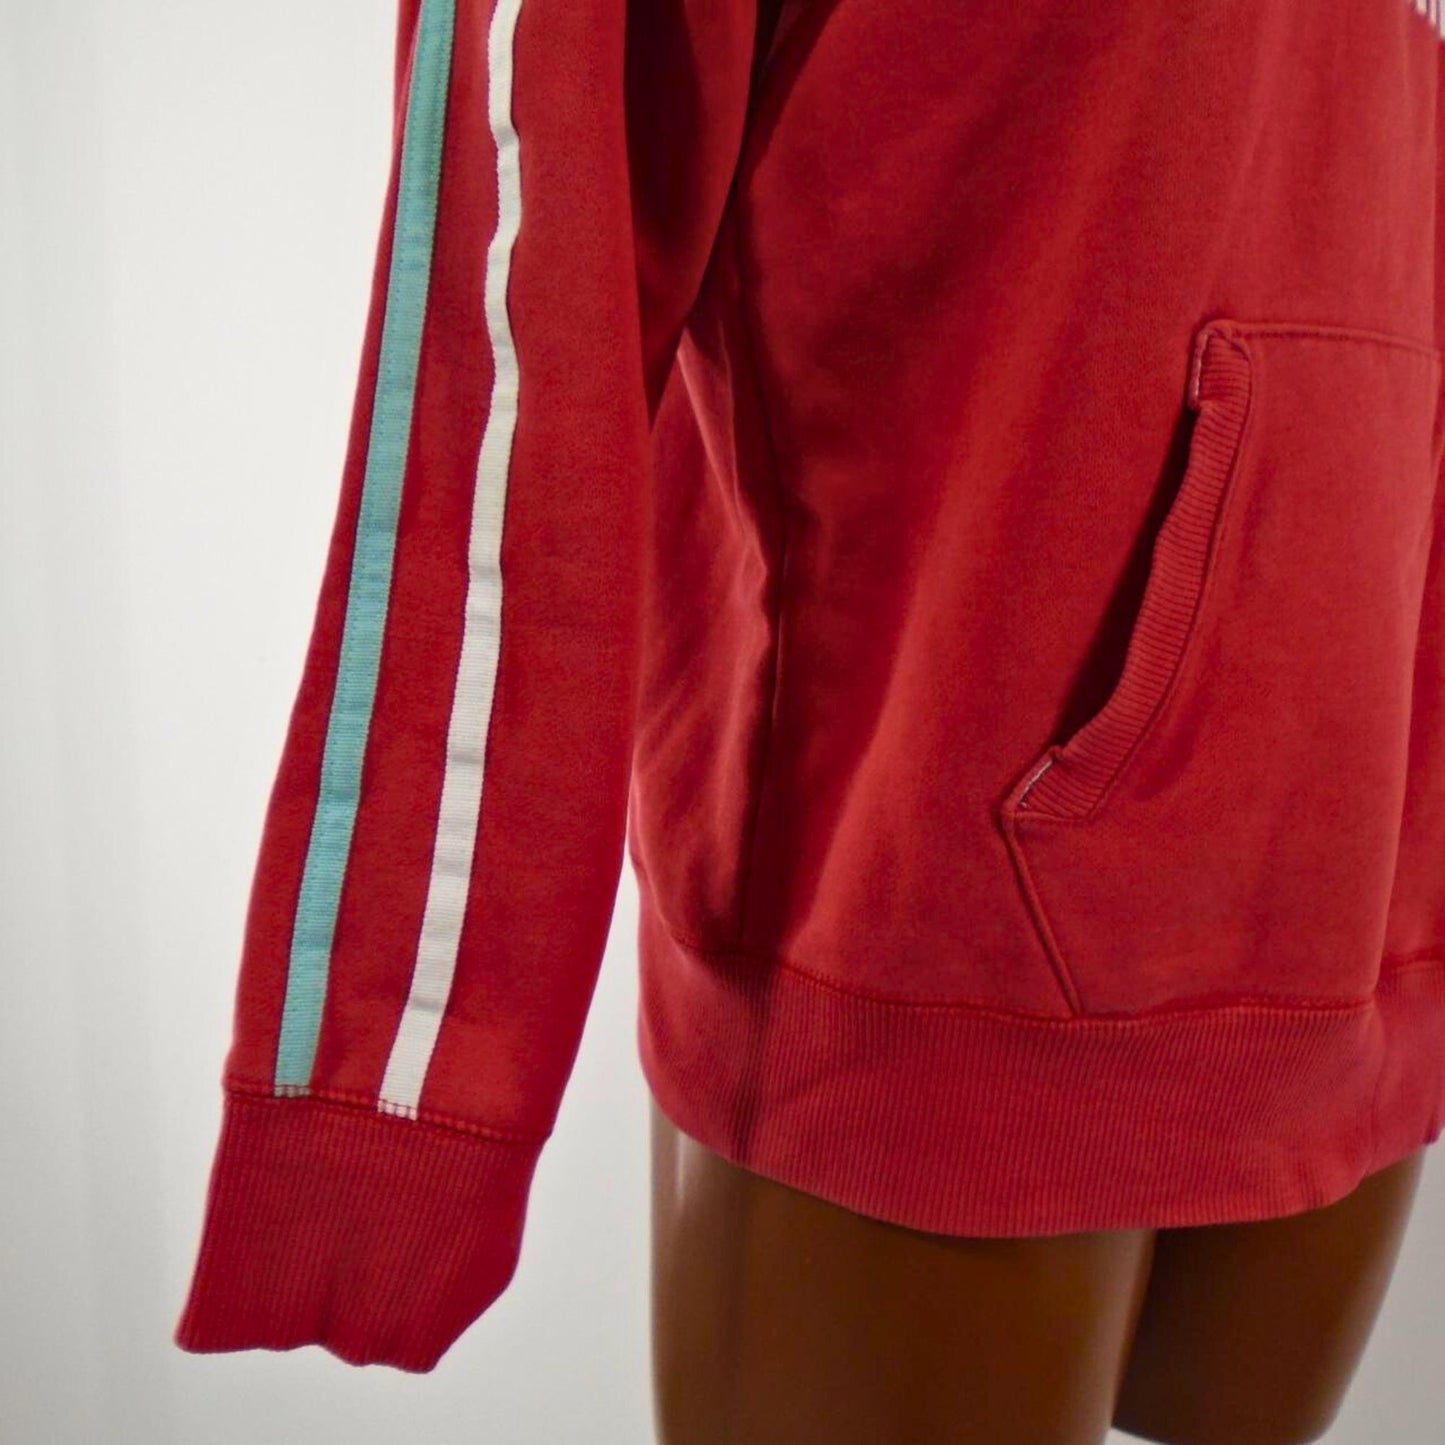 Grab Your Reebok Women's Red Hoodie, Size S - Used, Satisfactory Condition!